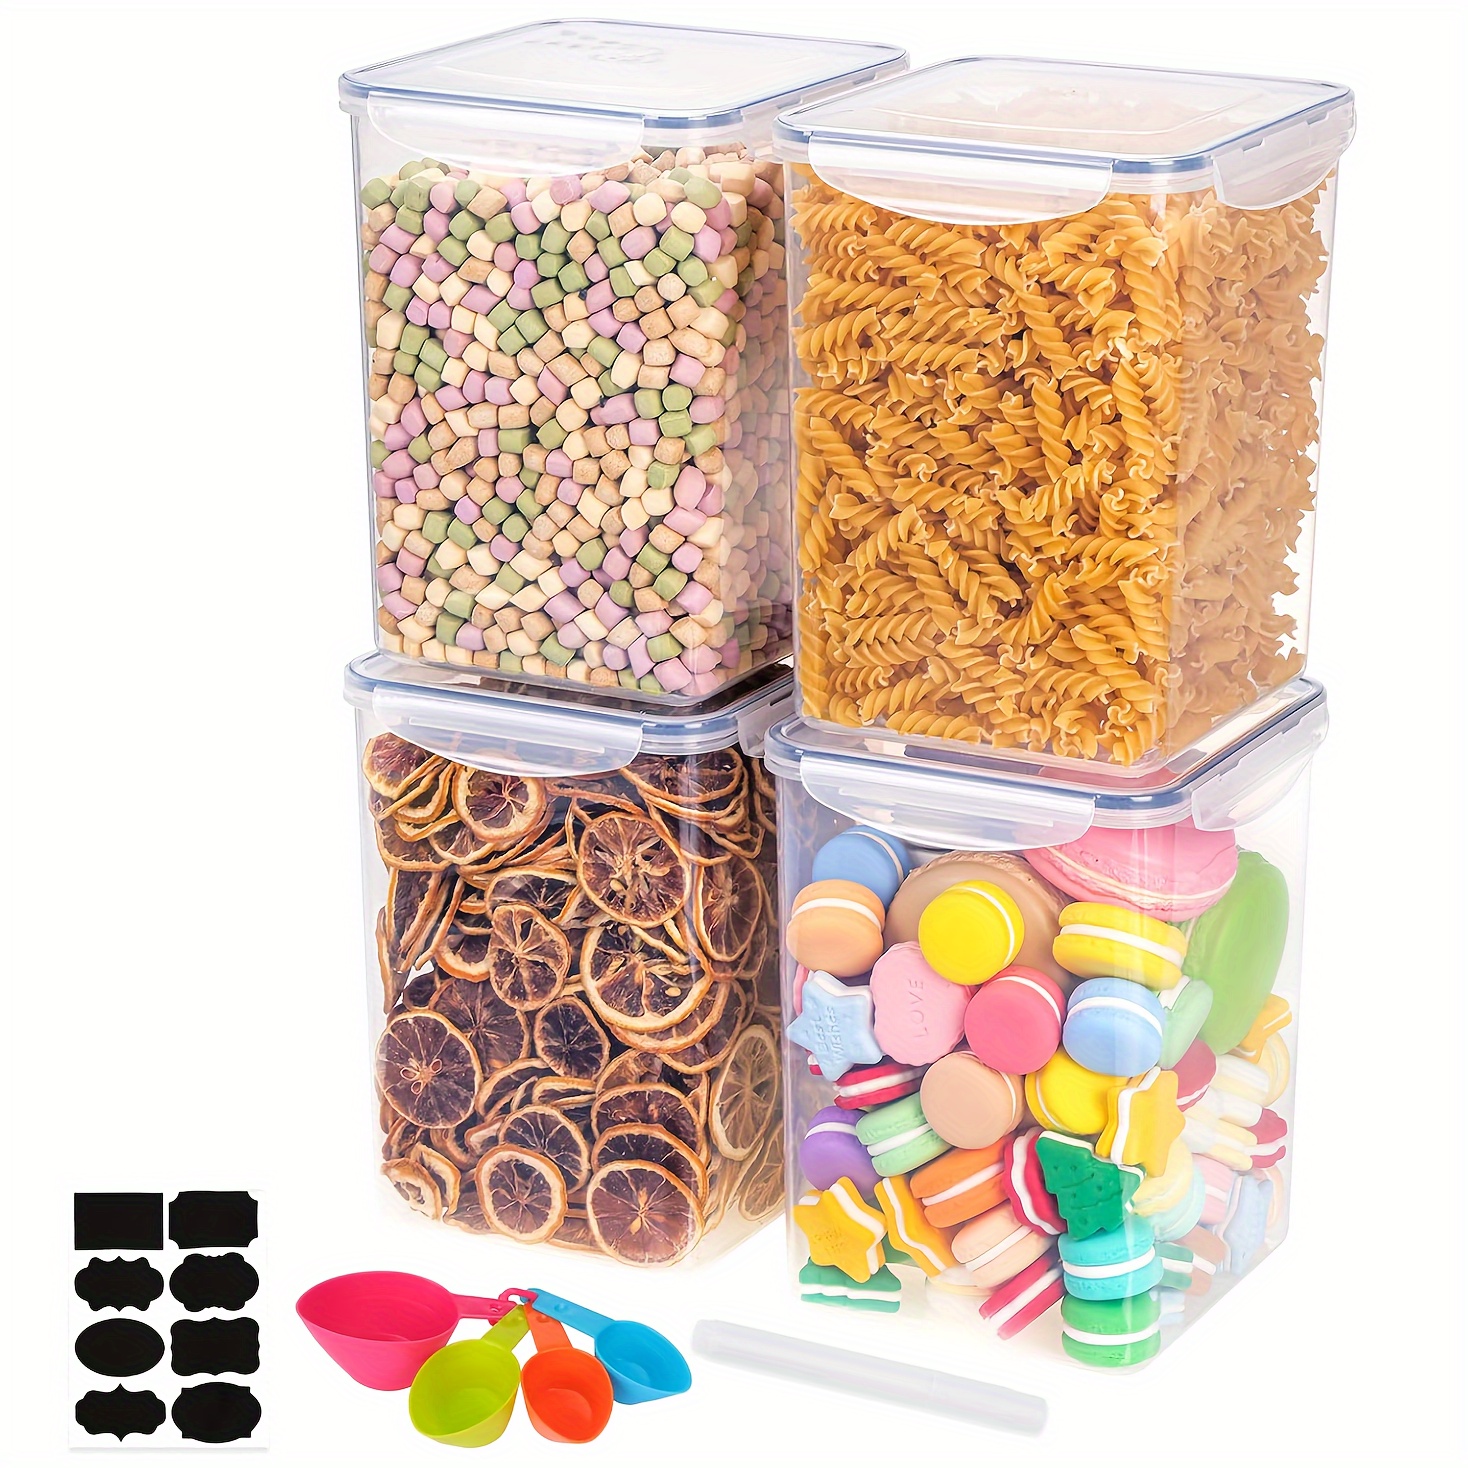 Large Food Storage Containers, Bpa Free Plastic Airtight Food